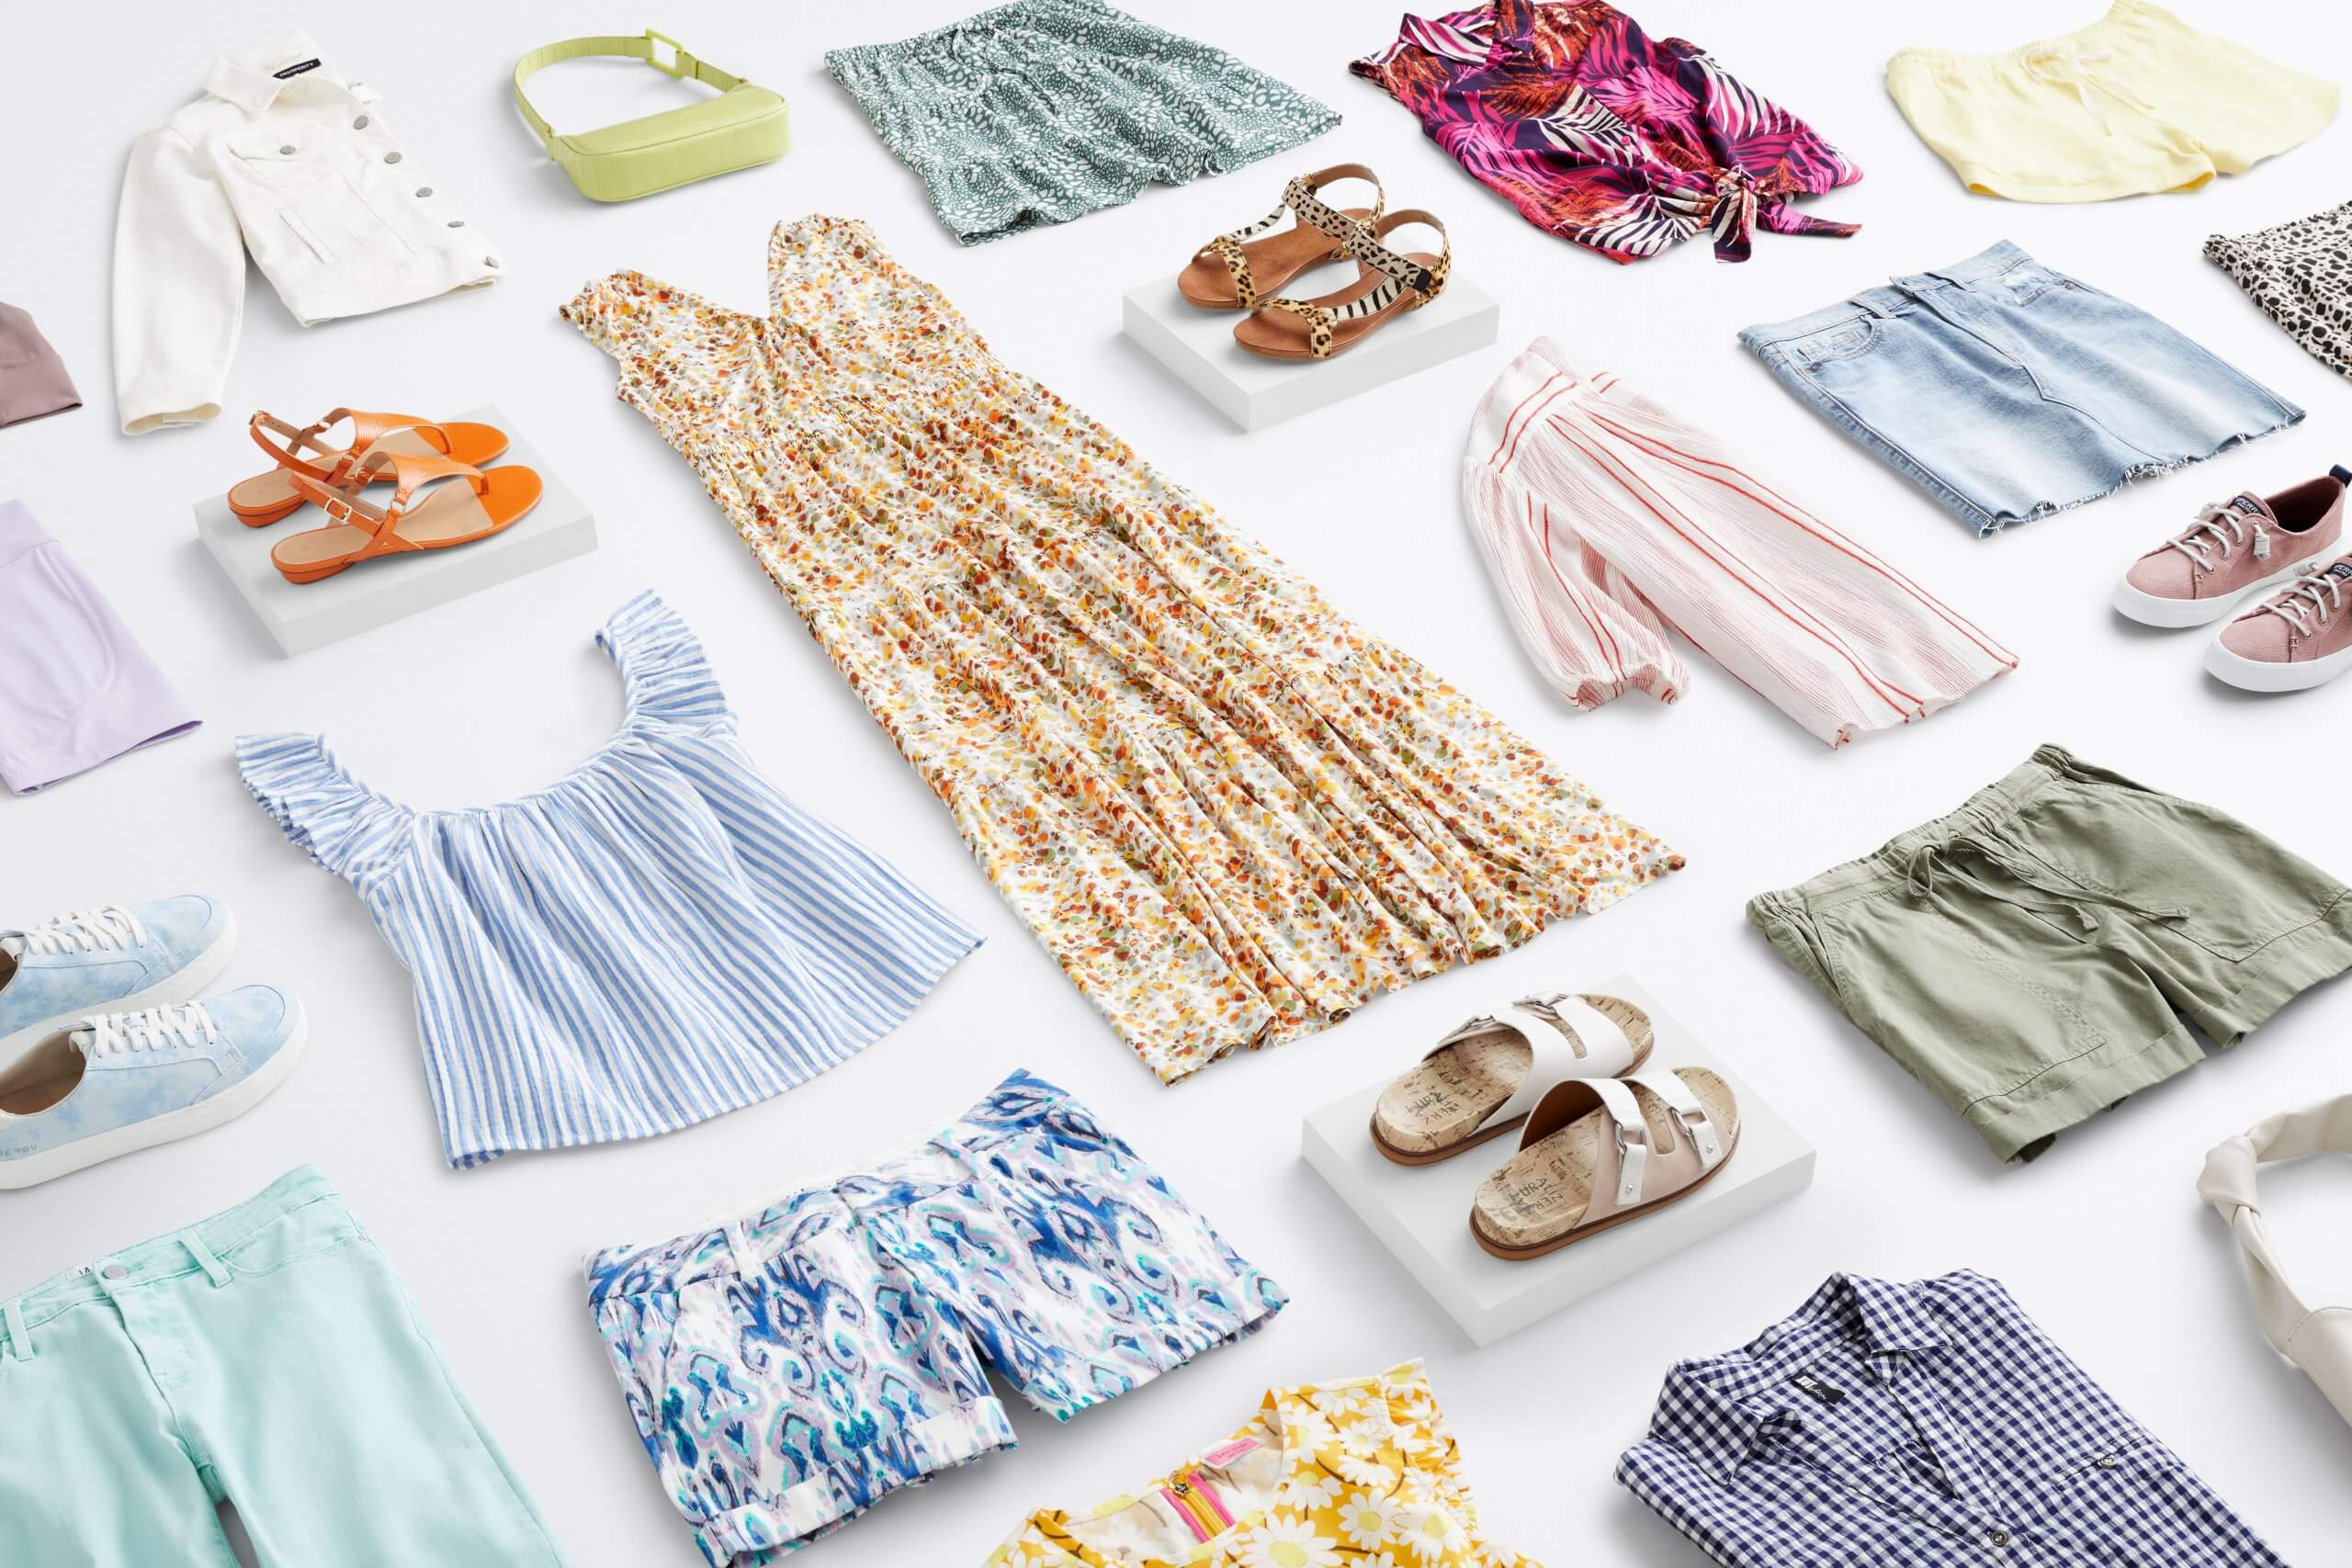 Stitch Fix Women's outfit laydown featuring a wide range of summer pieces including white denim jacket, shorts and skirts in blue, green and yellow tones, printed tank tops, floral maxi dress, sandals and sneakers in various tones.